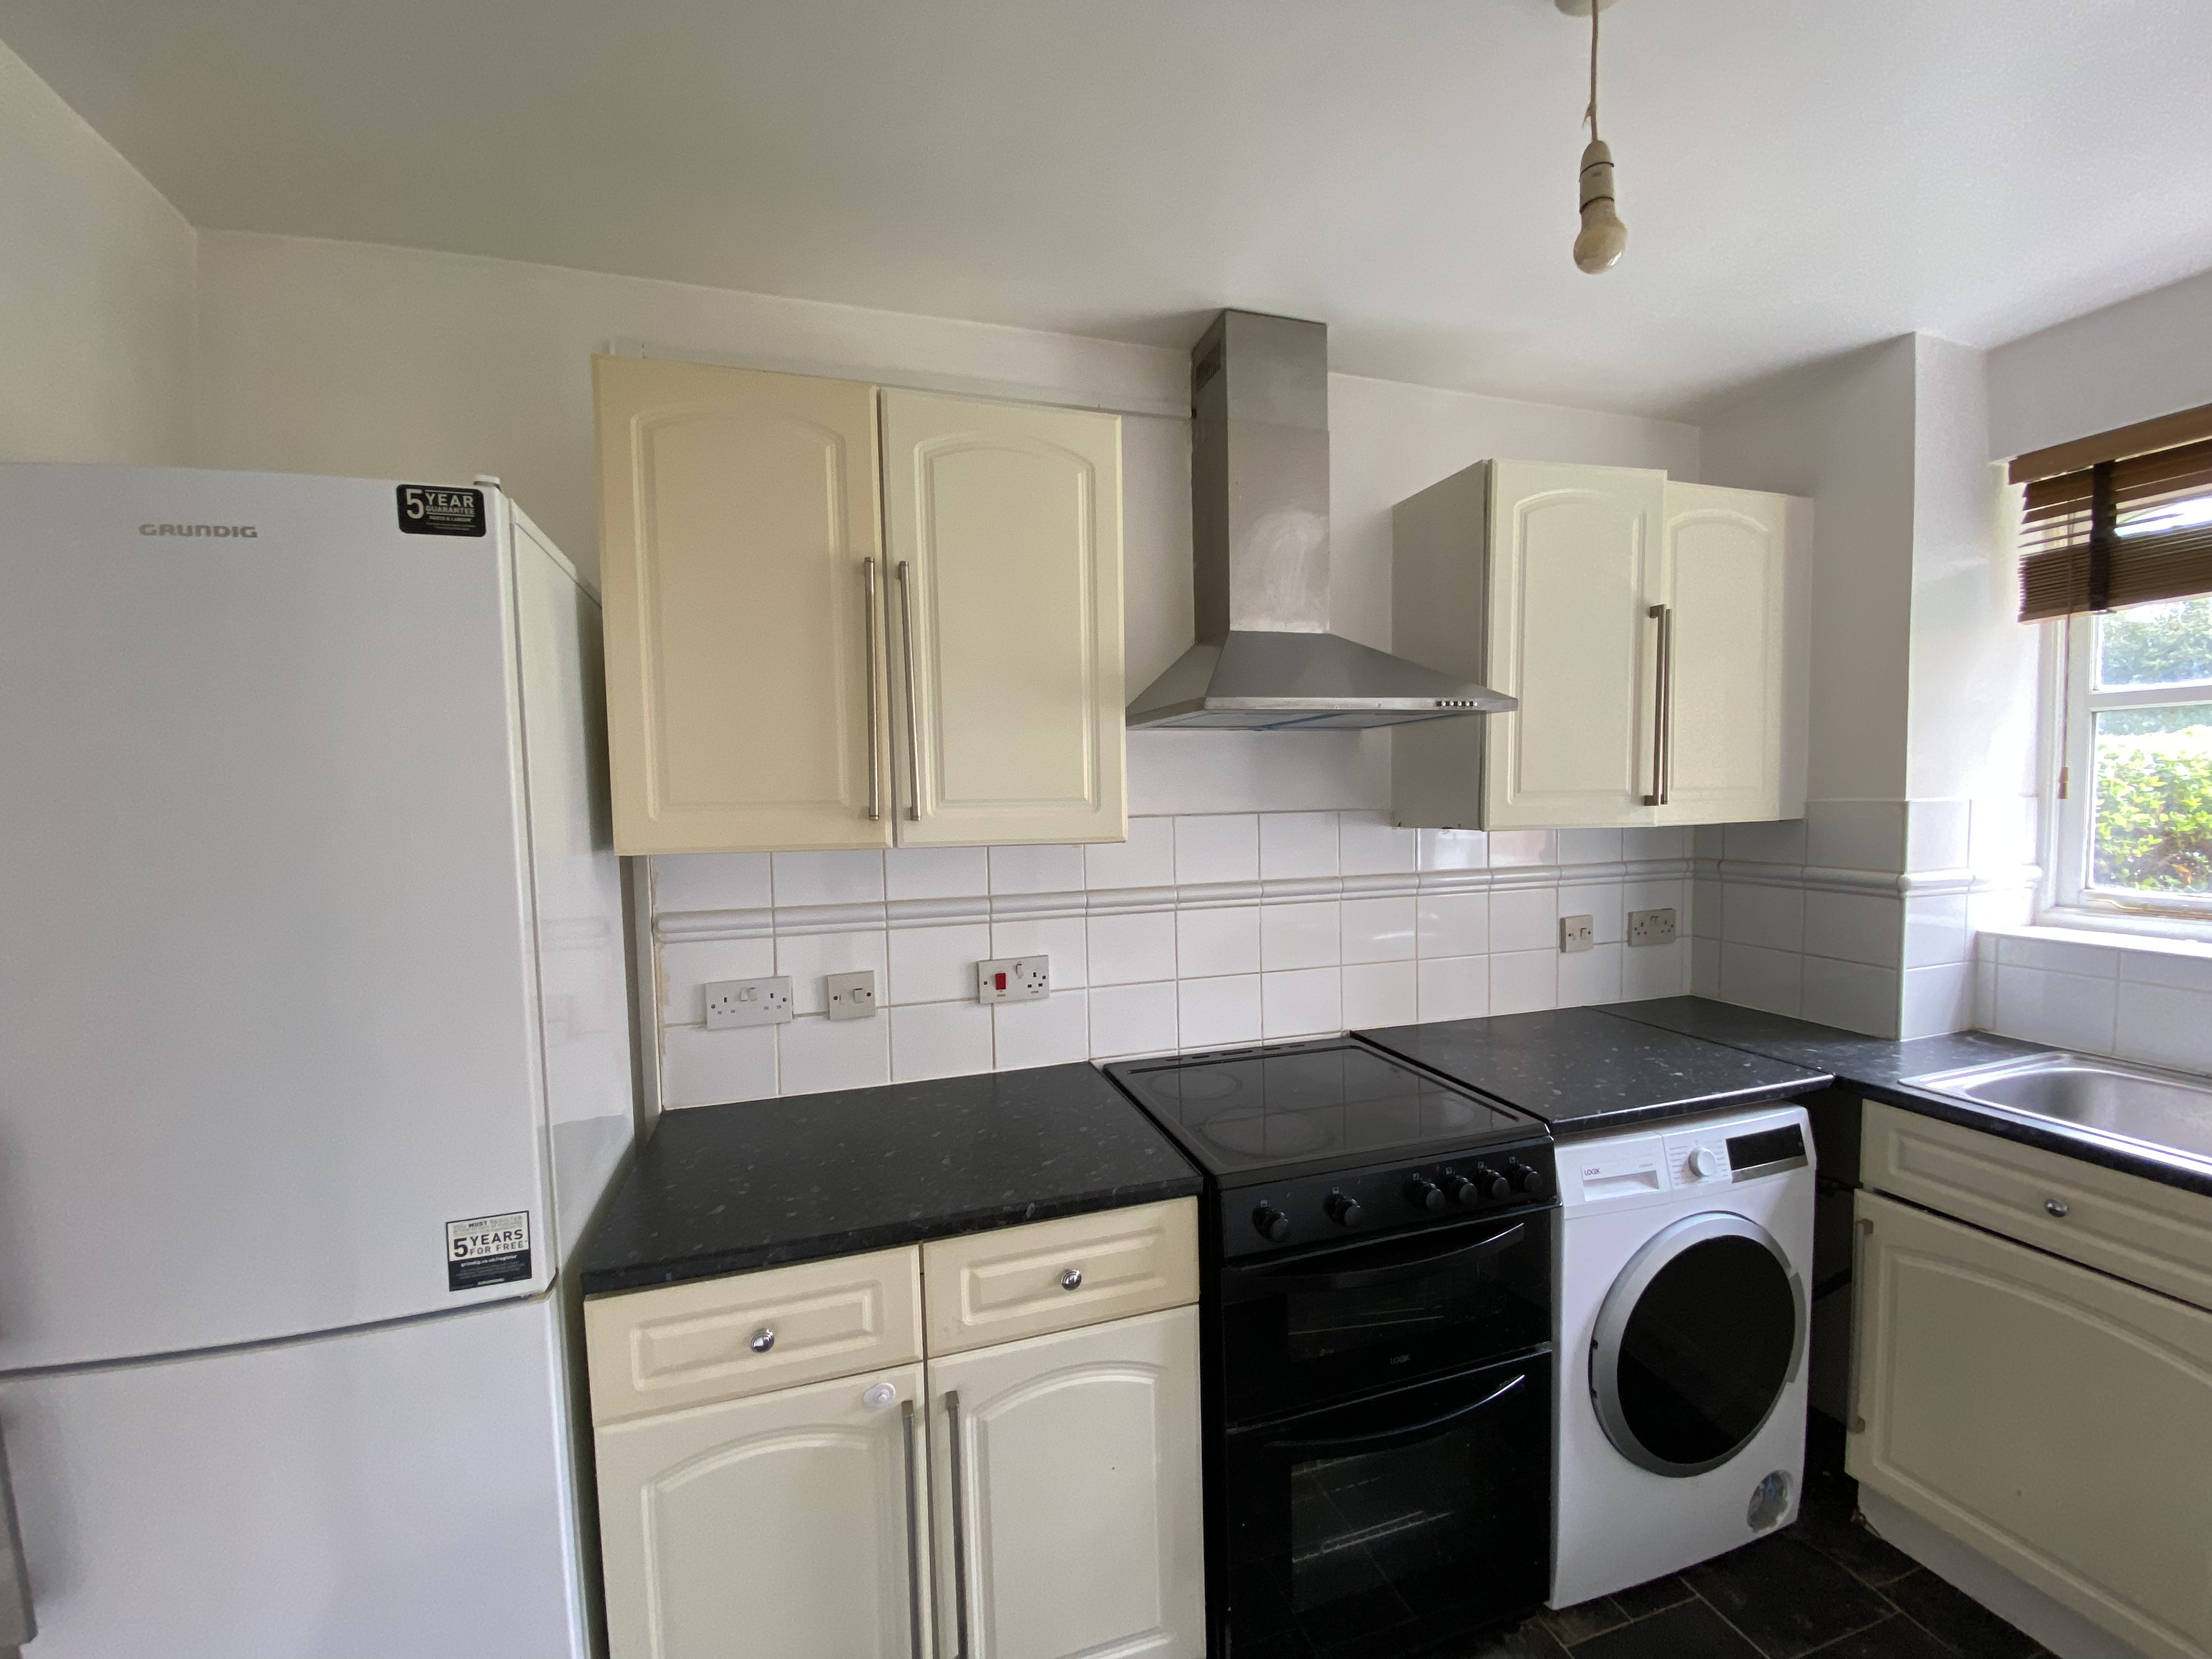 1 bedroom flat in NW2 – AVAILABLE NOW (ref. 2 W/D)